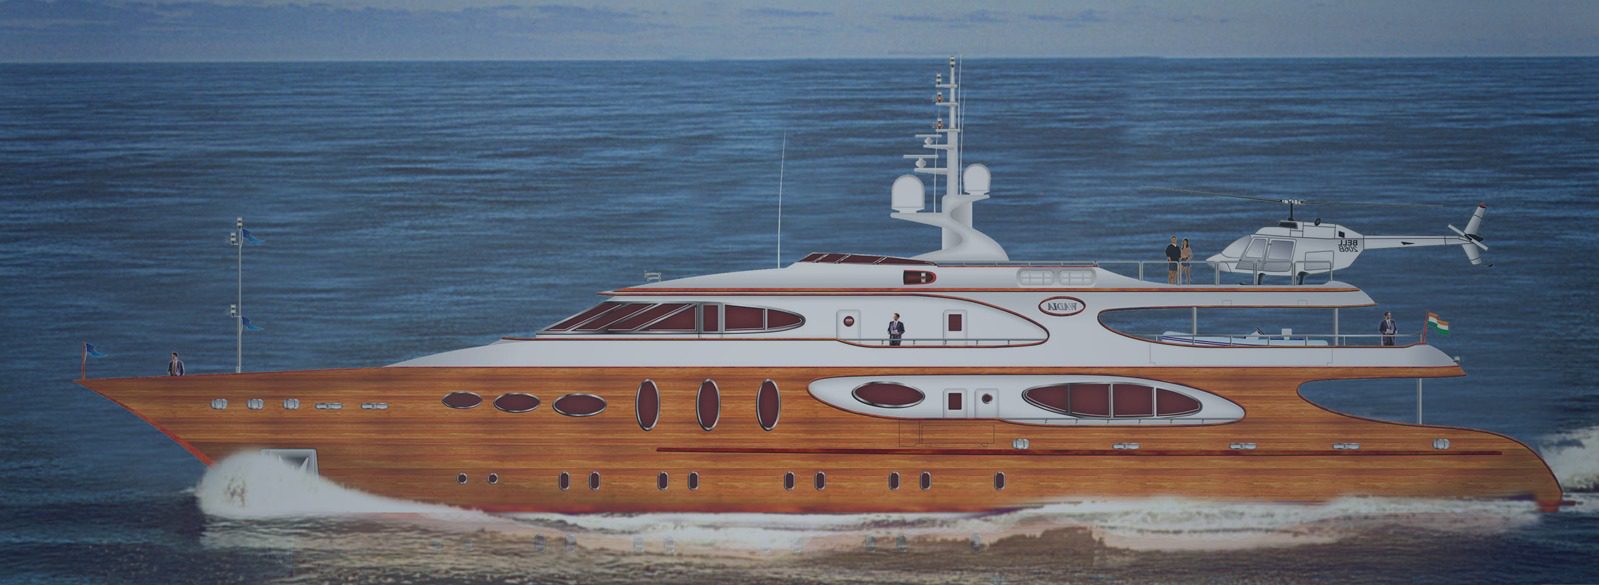 Contact - A.H Wadia Boat Builders